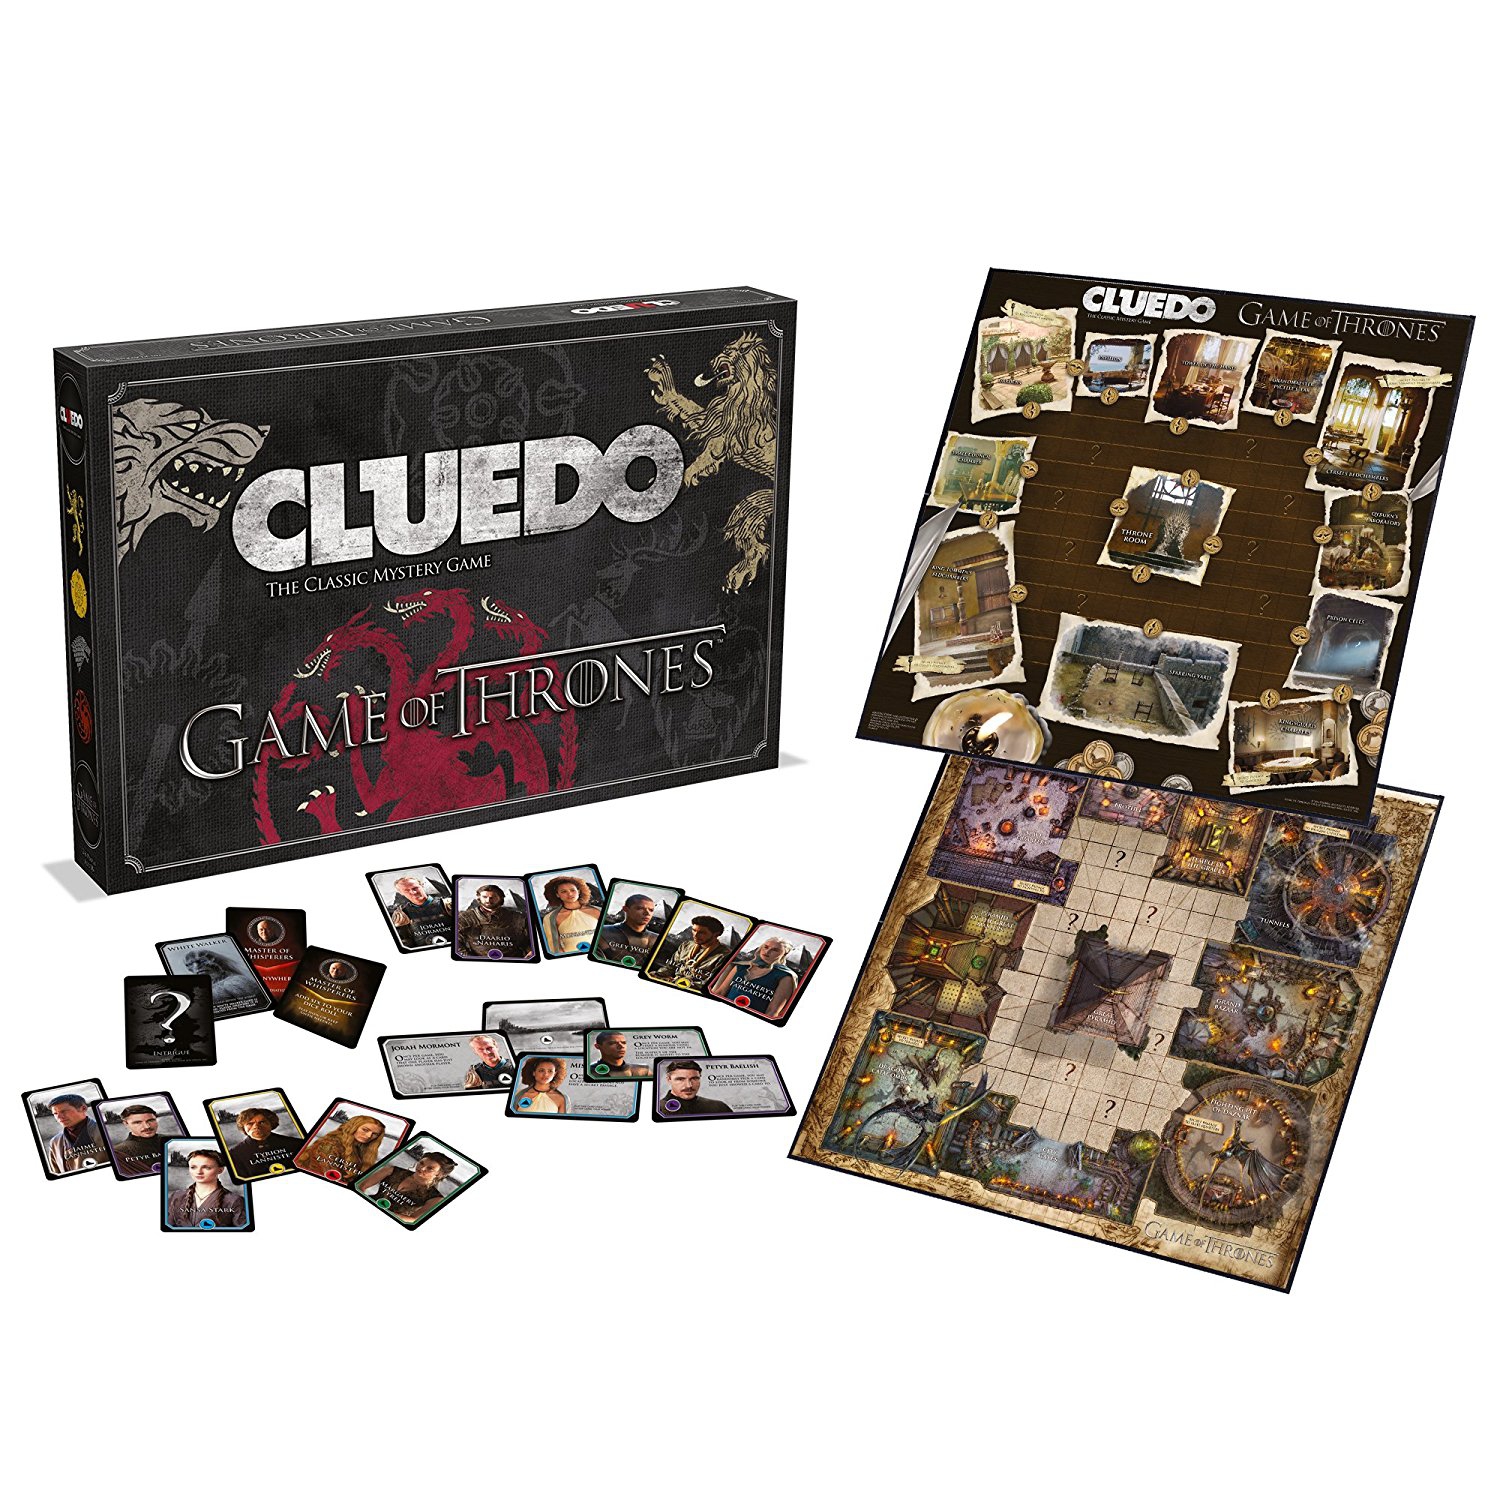 Cluedo 'Game of Thrones' Board Game